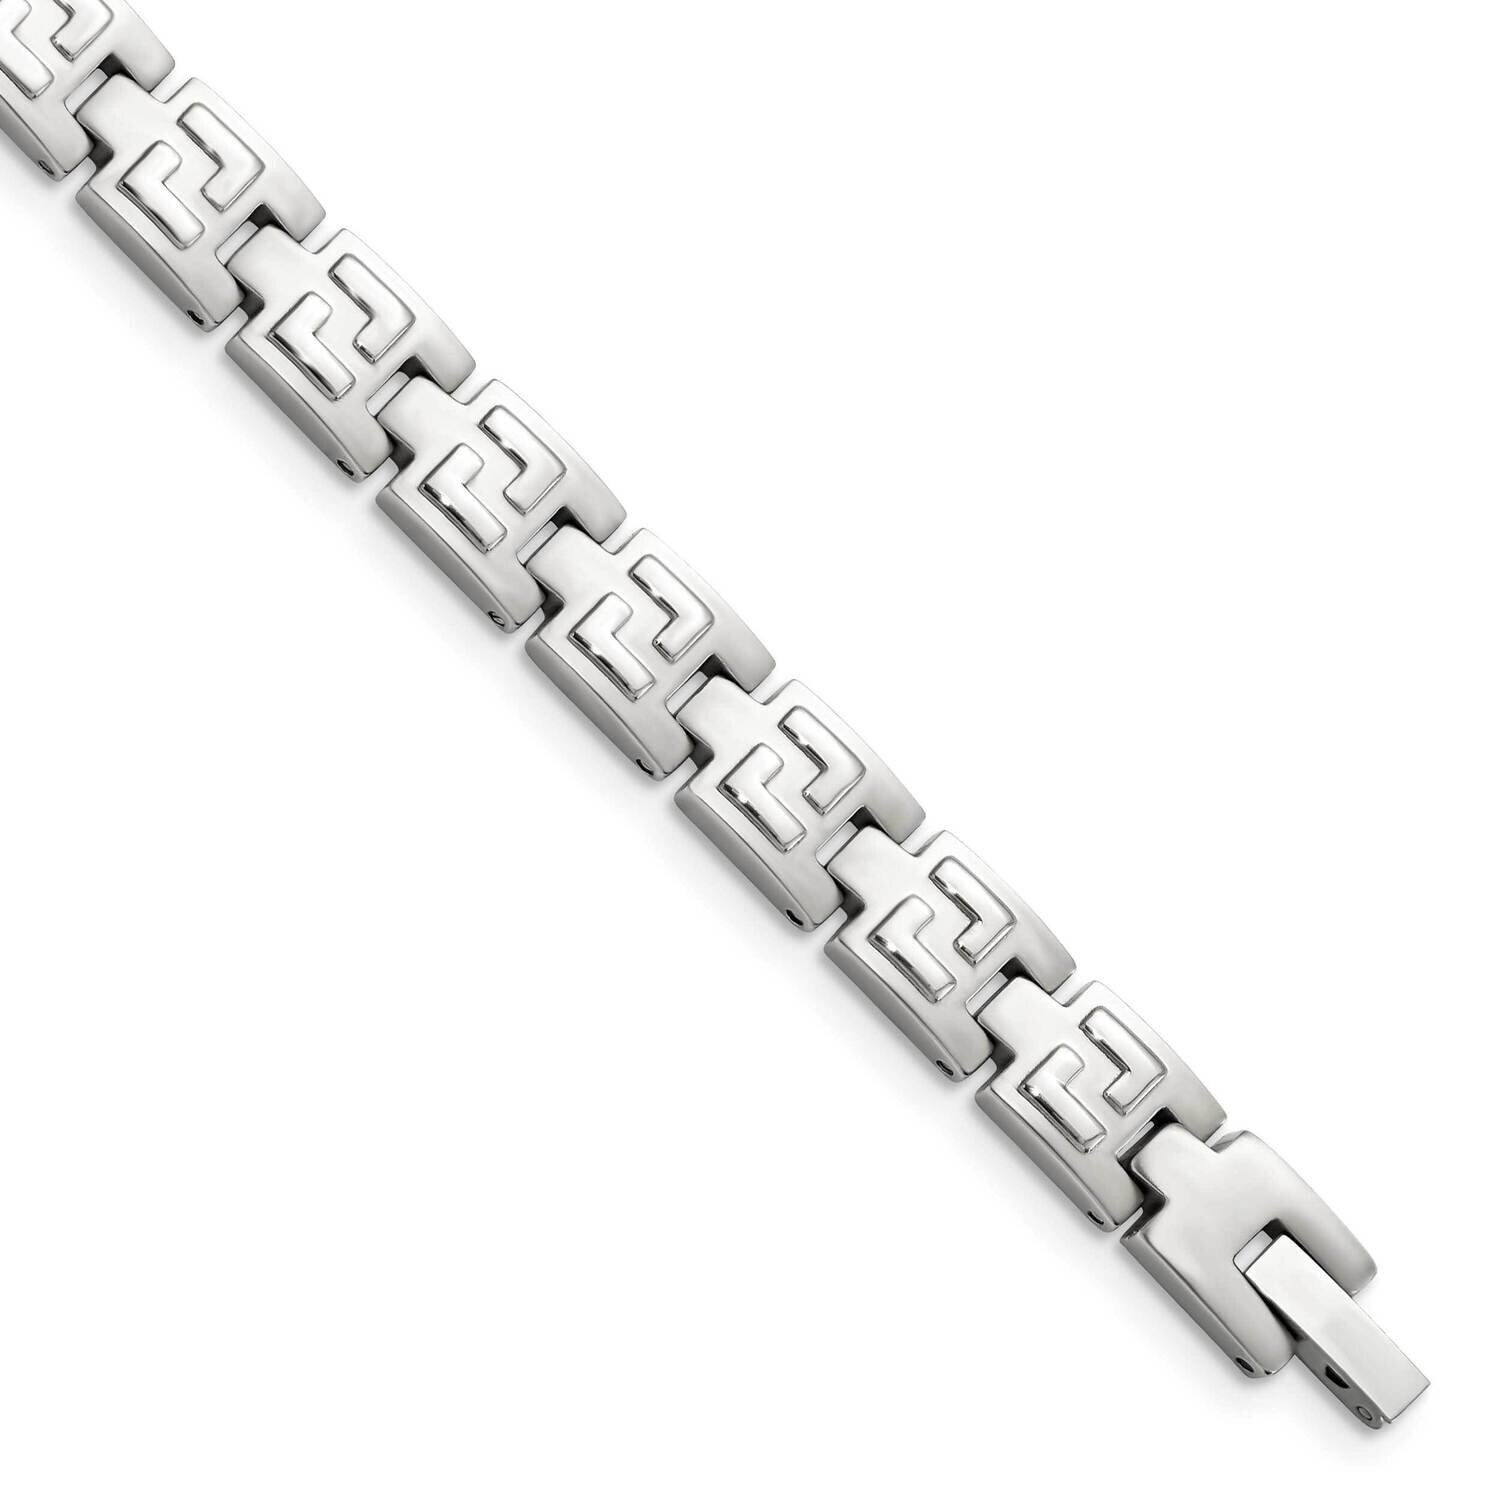 8.5 Inch Bracelet Stainless Steel Brushed and Polished SRB101-8.5